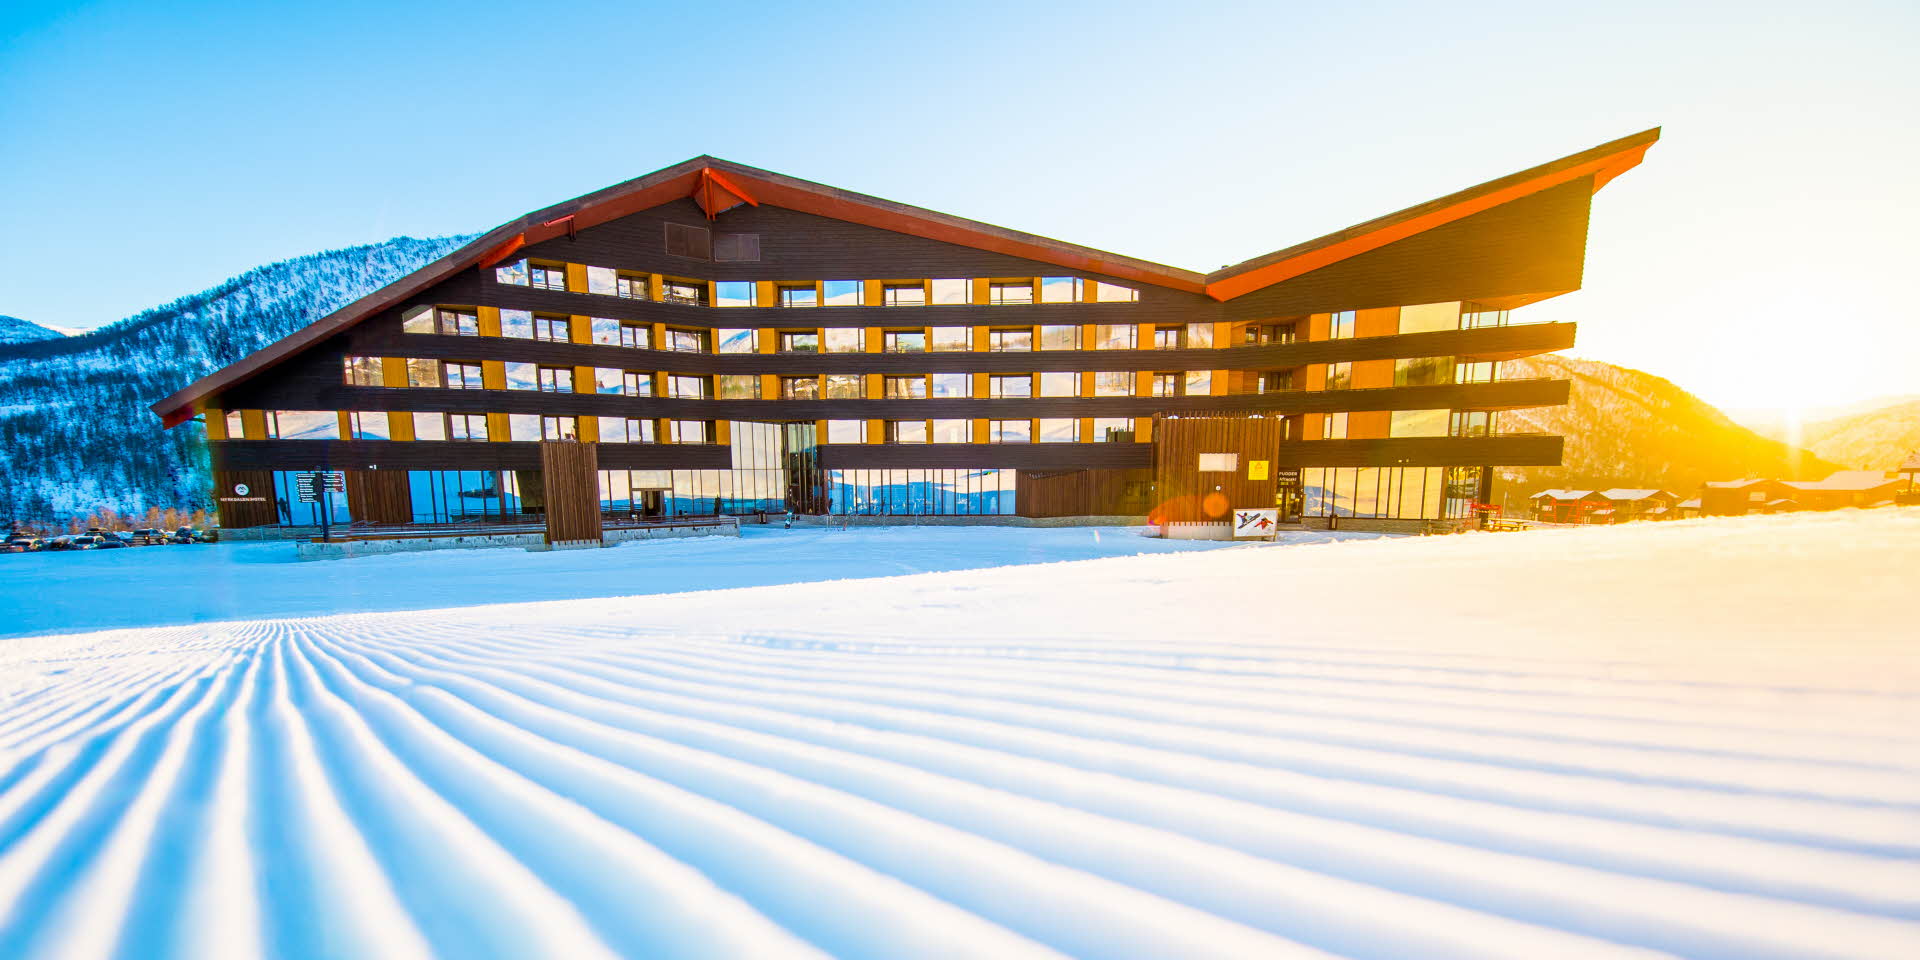 Myrkdalen Hotel seen from the ski slopes in winter